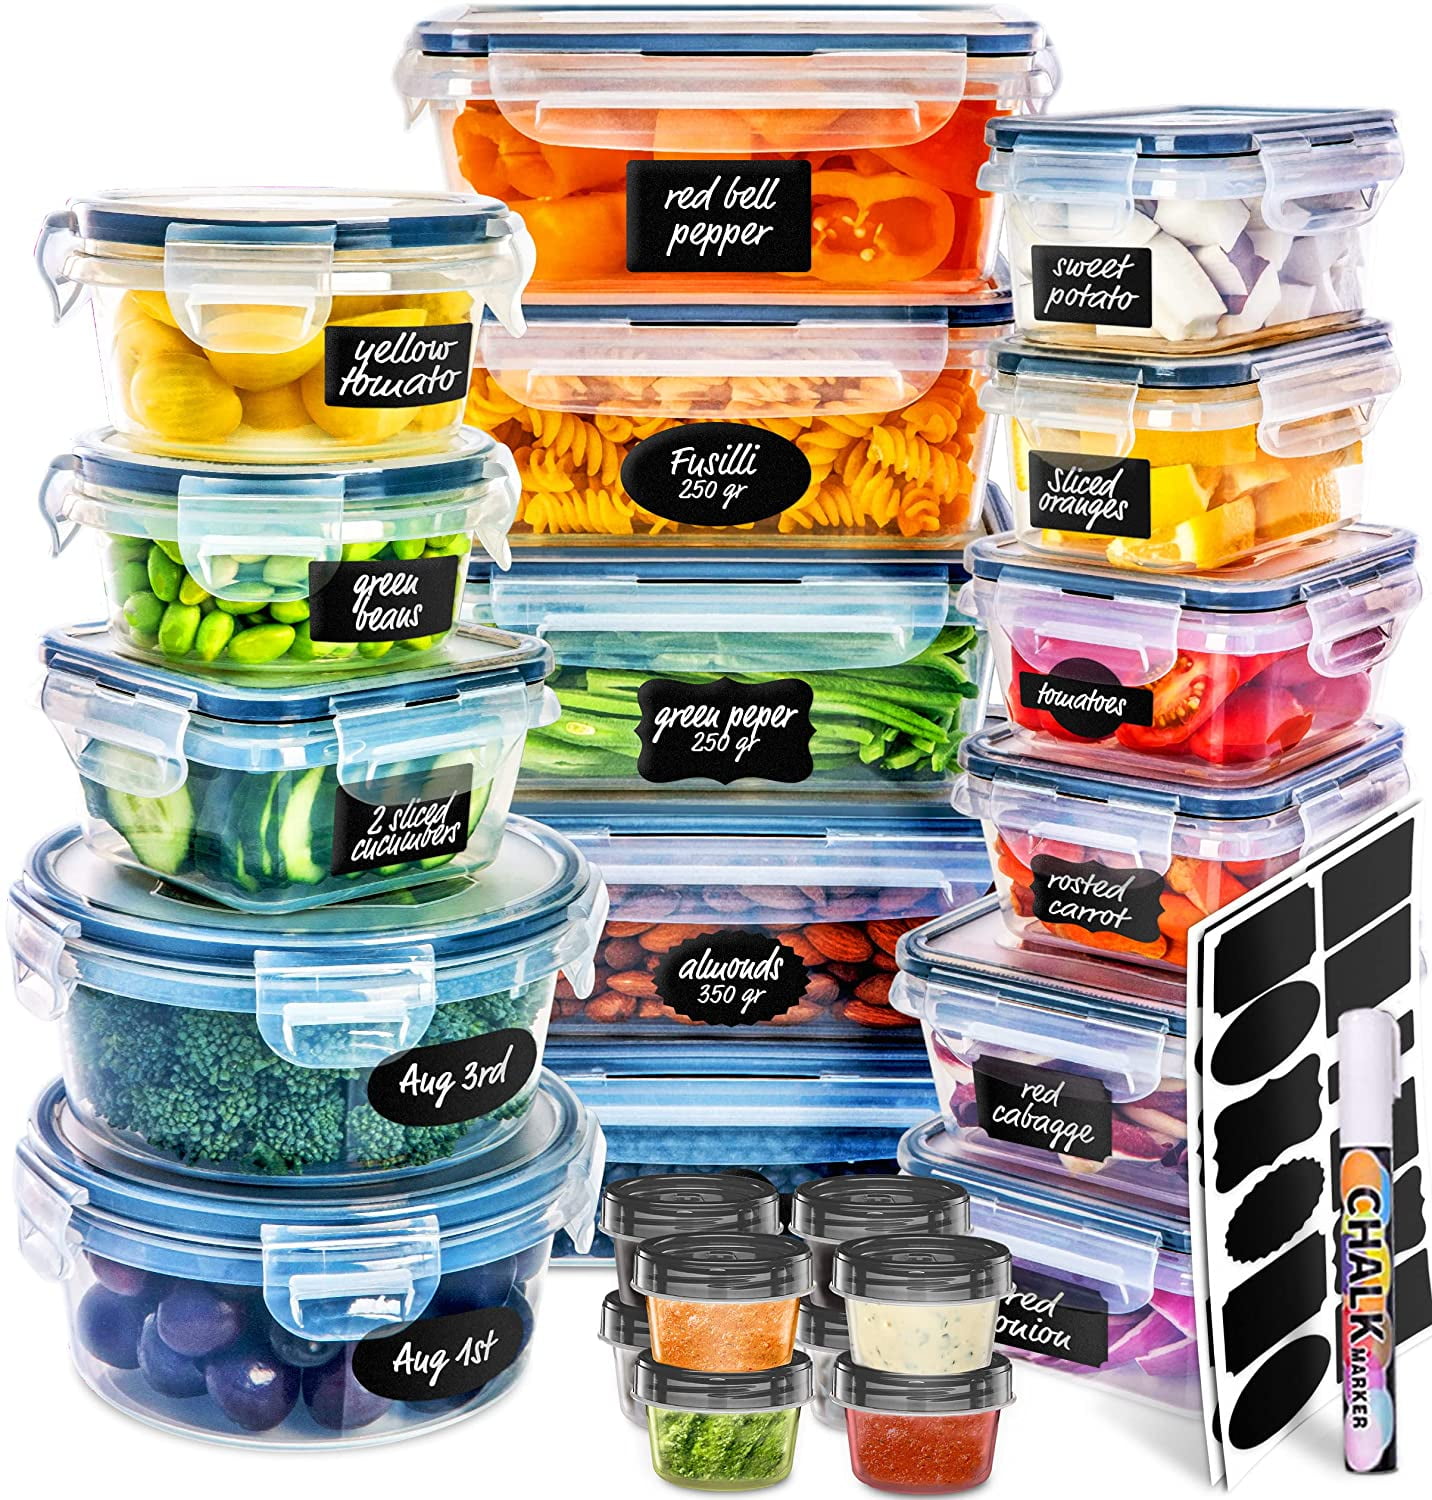 Mini Storage Containers with Lids, Sure Fresh, Plastic, Reusable, Round and Rectangular 20-pc Set